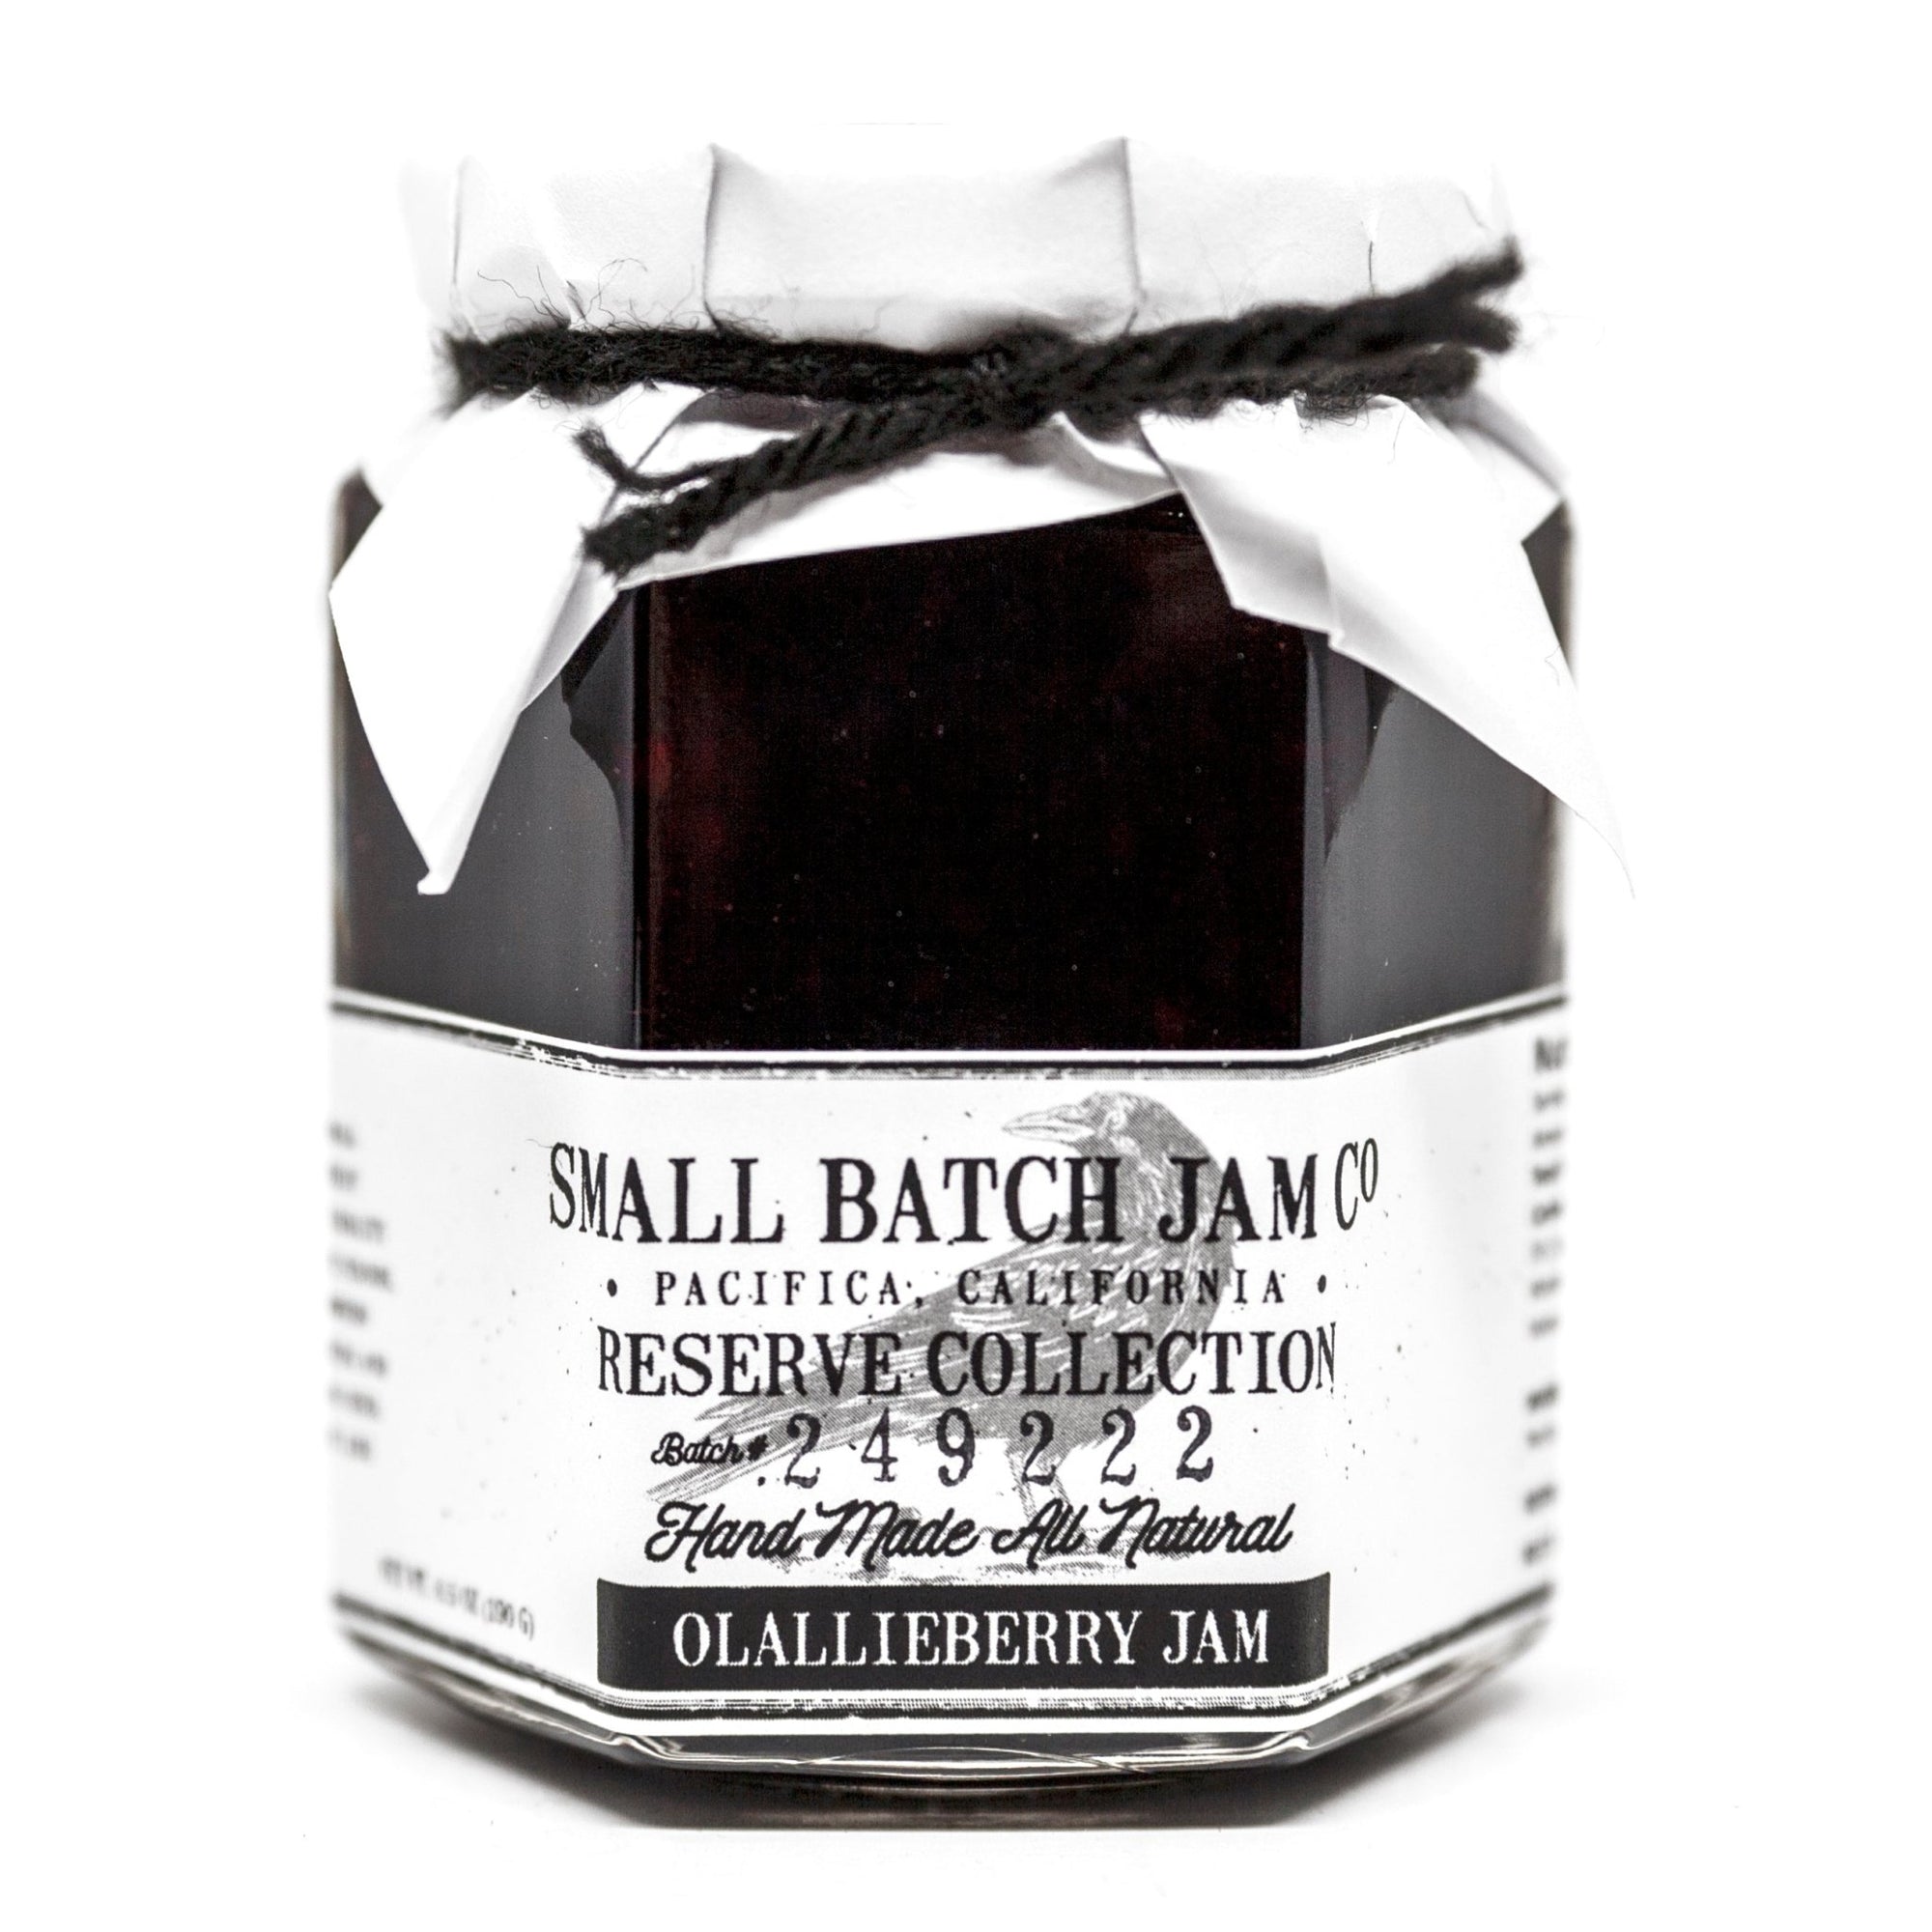 Olallieberry Jam - Reserve Collection - Small Batch Jam Co